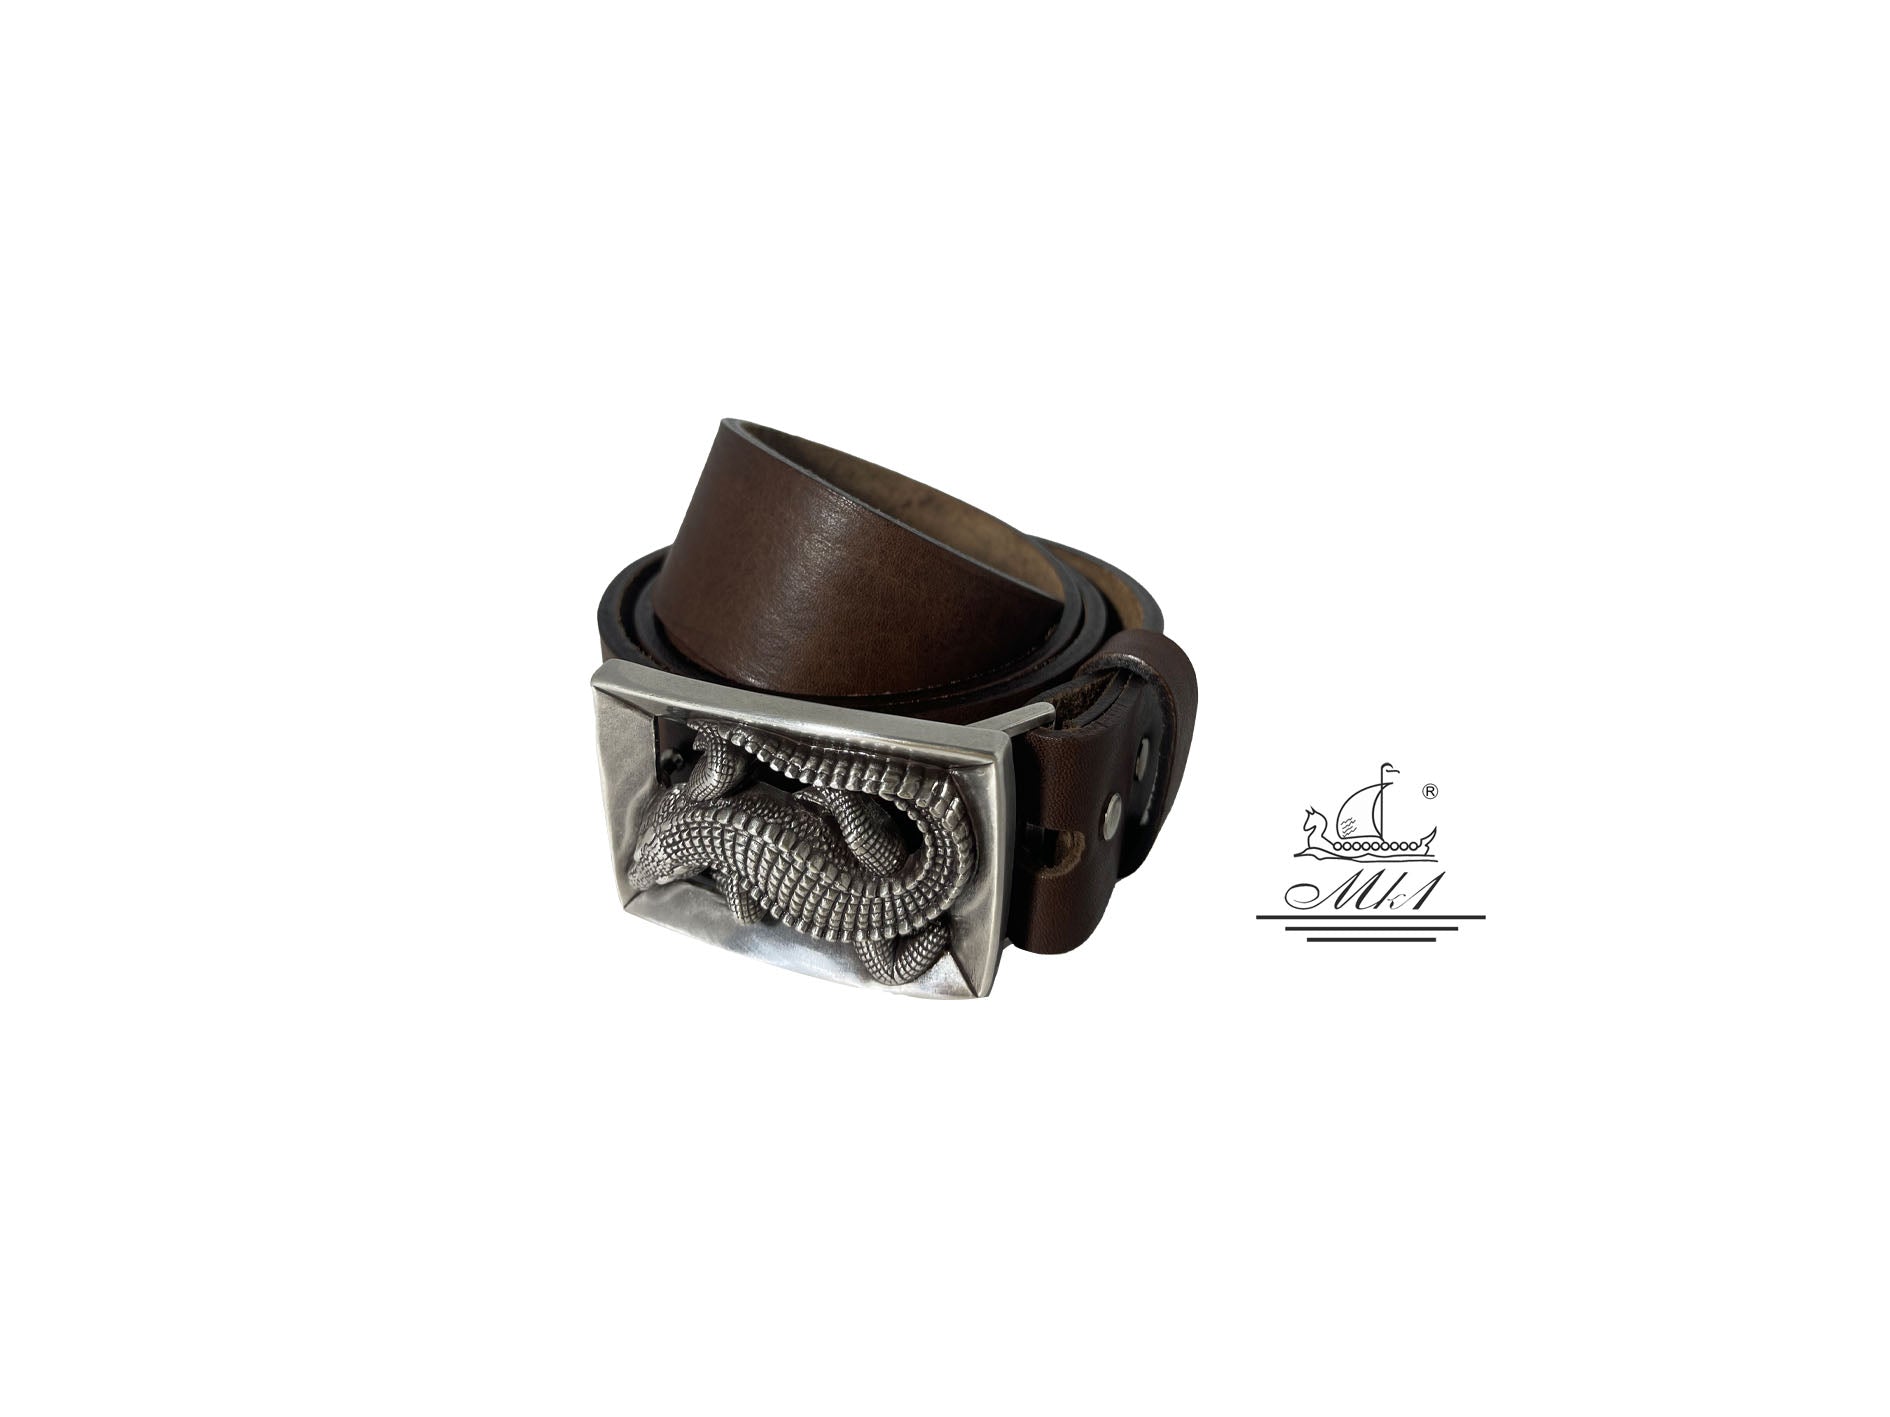 Unisex 4cm wide belt handcrafted from brown leather. 100976/40BR